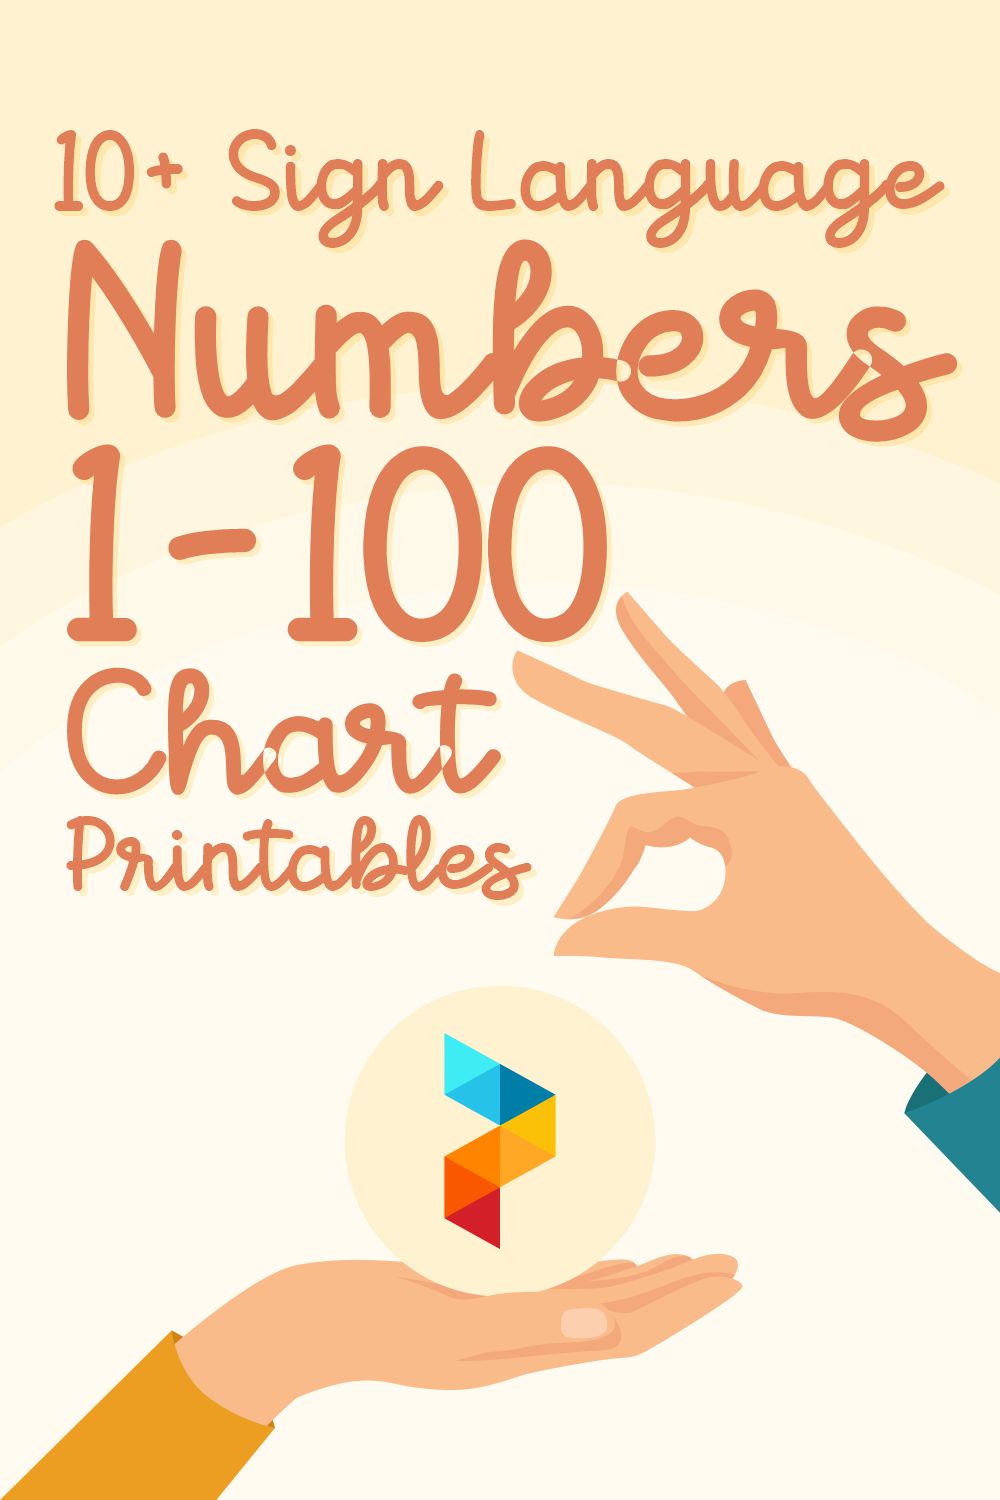 Sign Language Numbers 1-100 Chart Printables